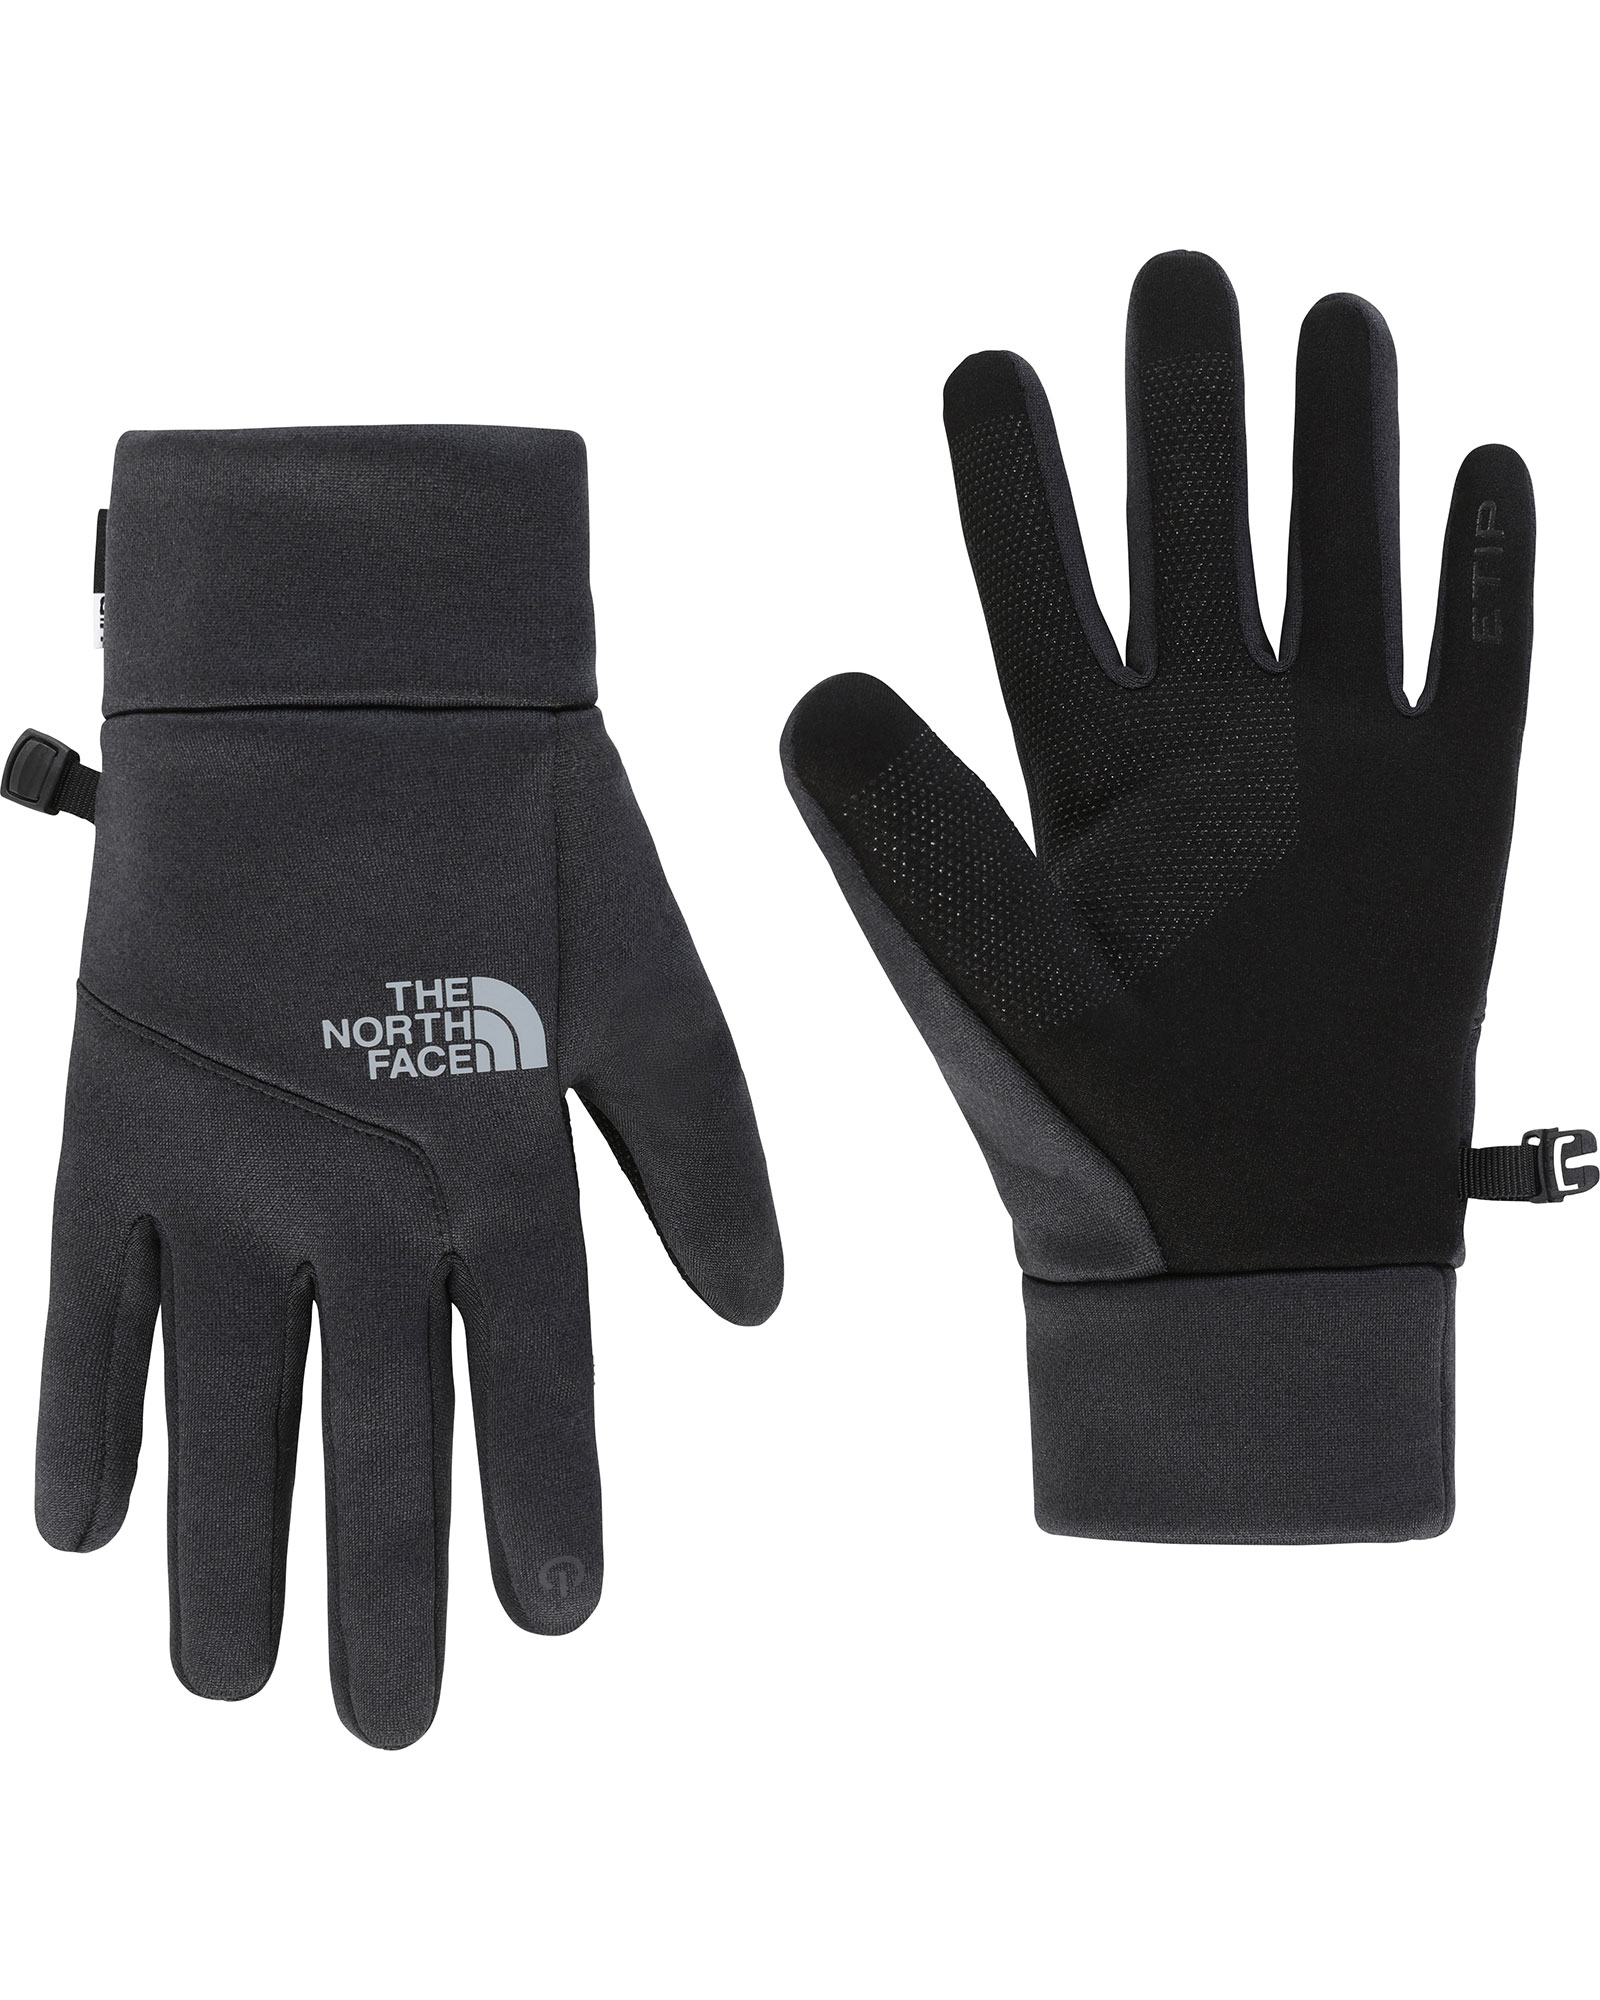 The North Face Etip Hardface Women’s Gloves - TNF Black Heather S